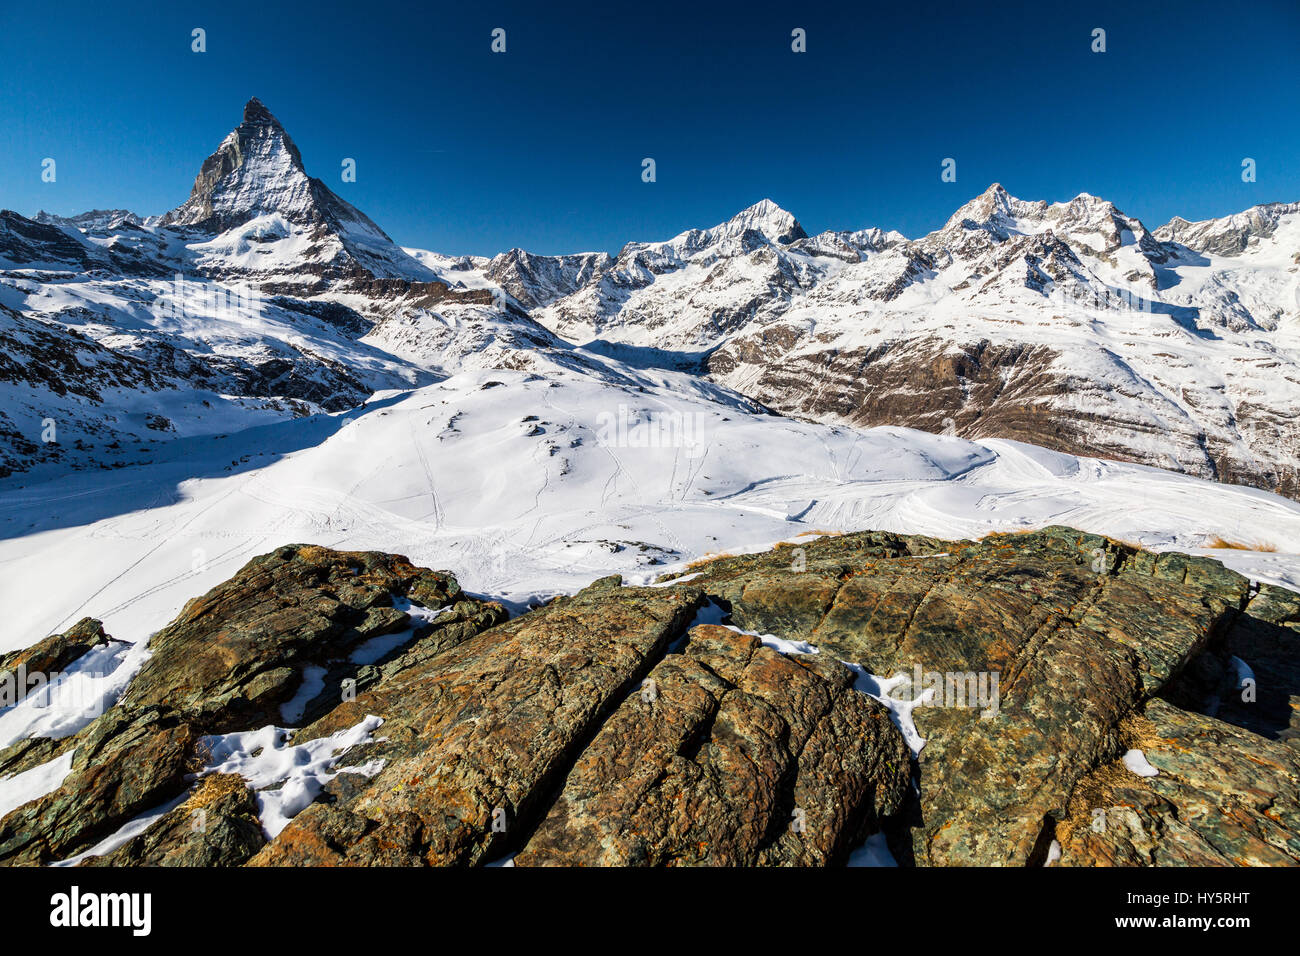 riffelsee,roteboden,matterhorn,peak,travel,travel photography,outdoors,outside,nature,touristic,travel destinations,exterior view,attraction,attractions,beauty in nature,color image,natural beauty,mountain scenery,mountain landscapes,mountain landscape,la Stock Photo